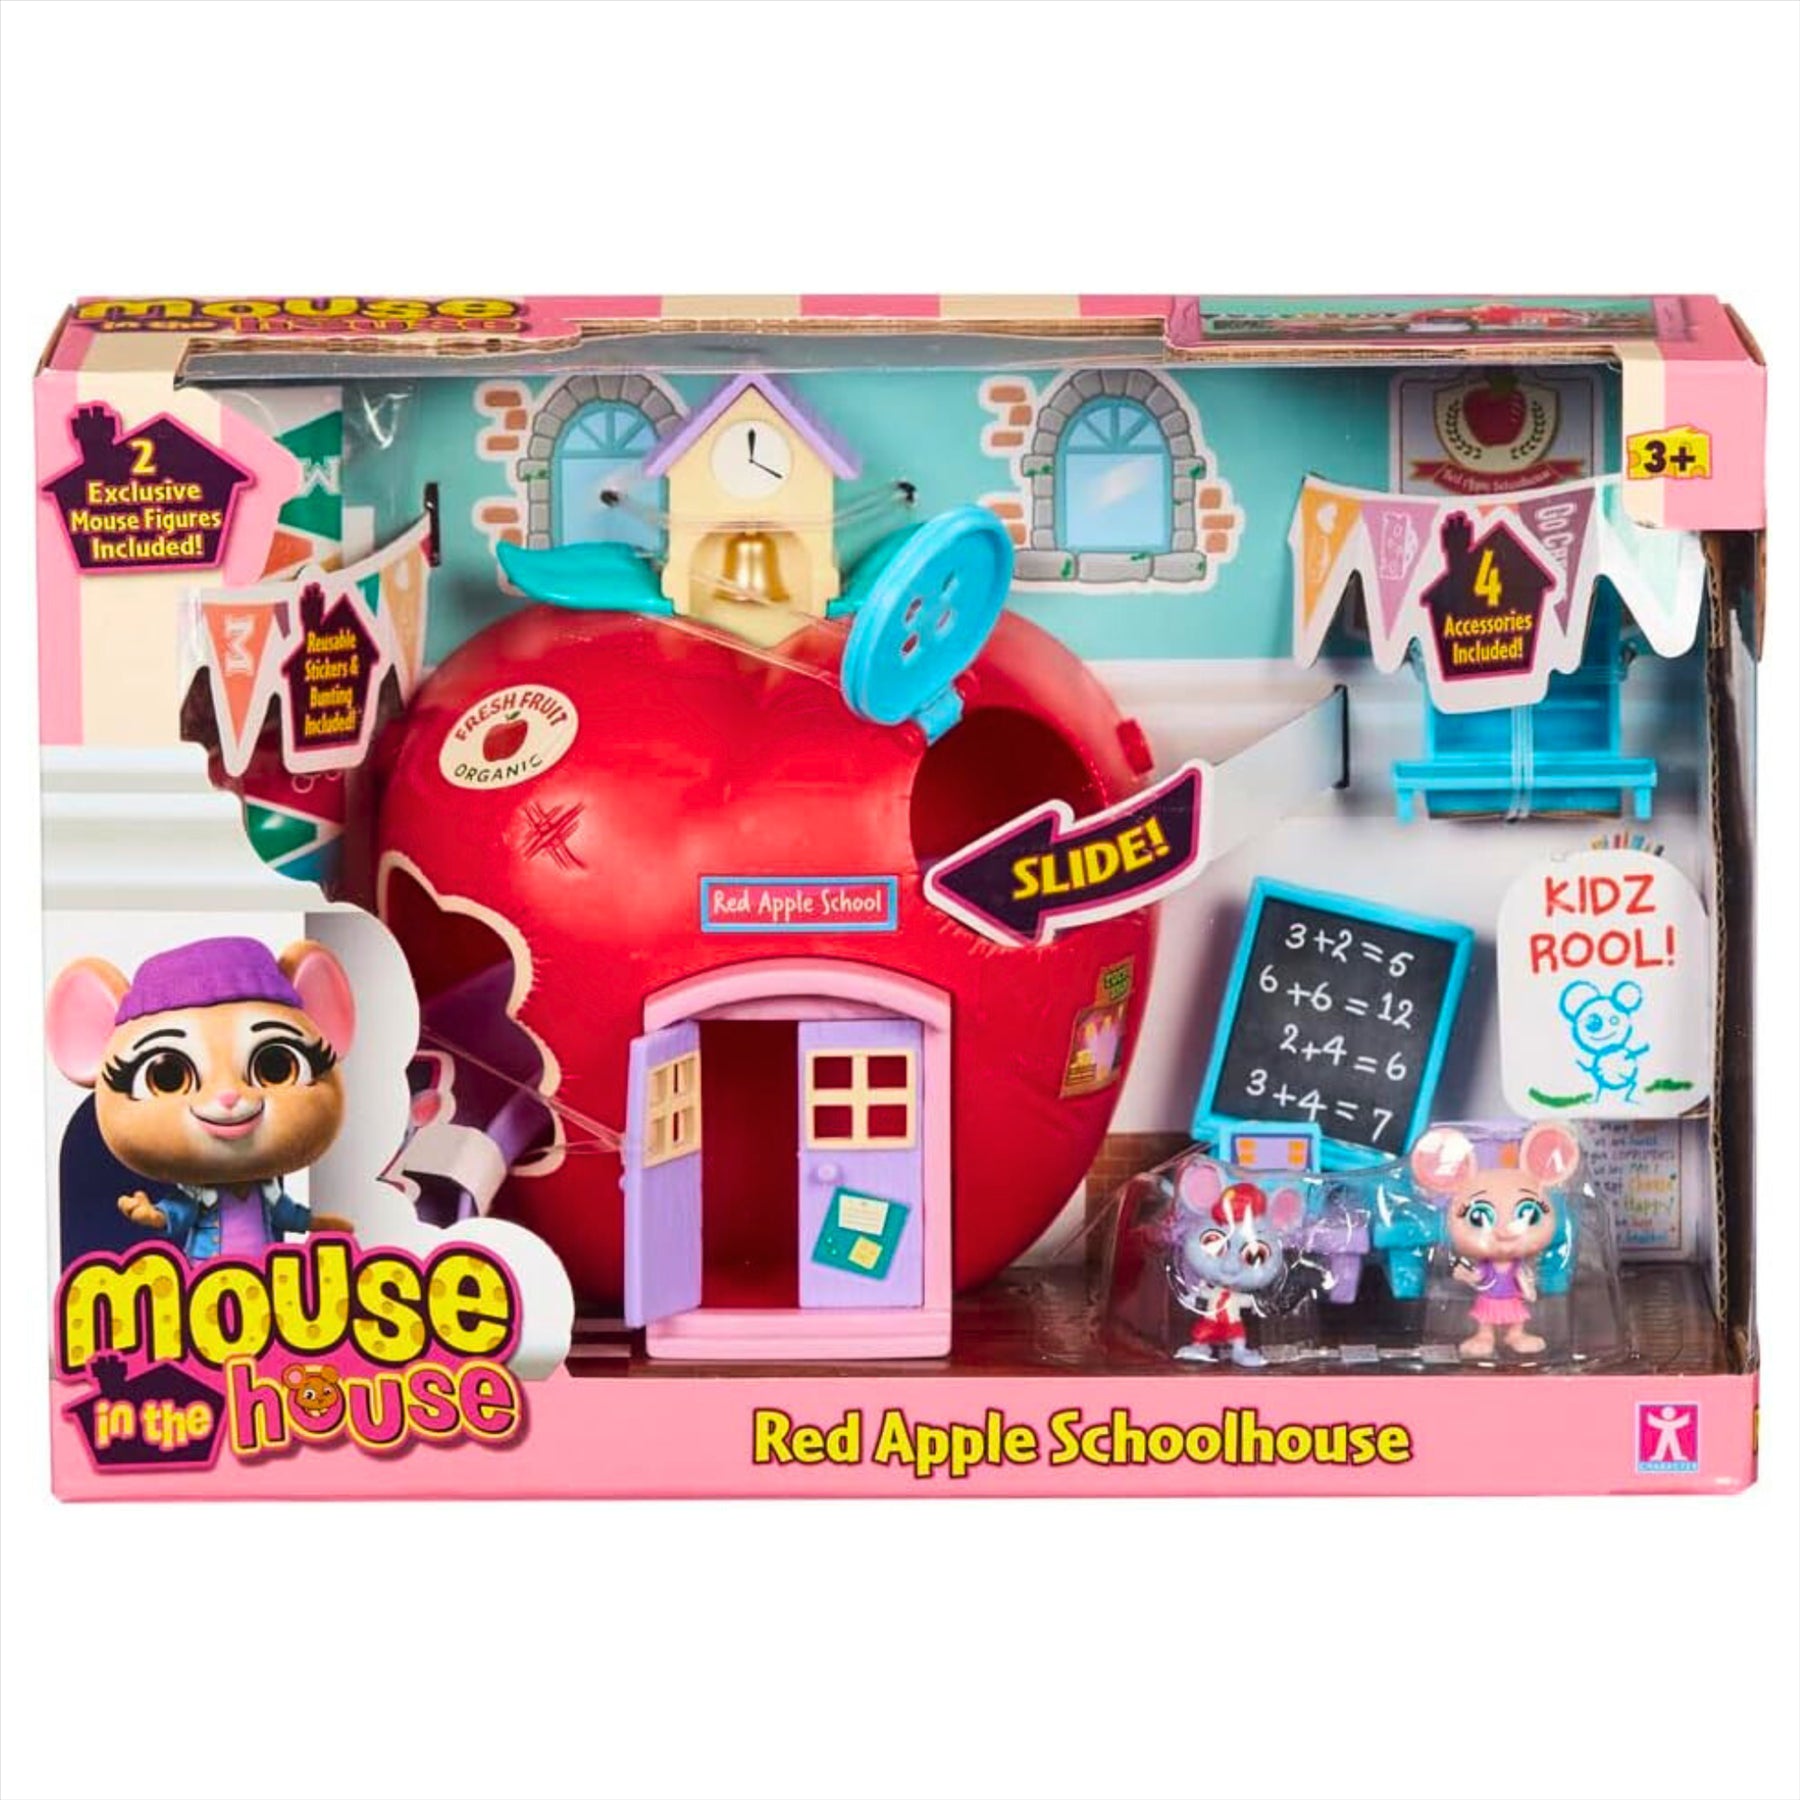 Millie and Friends Mouse in the House Red Apple Schoolhouse Toy Playset with Figures and Accessories - Toptoys2u